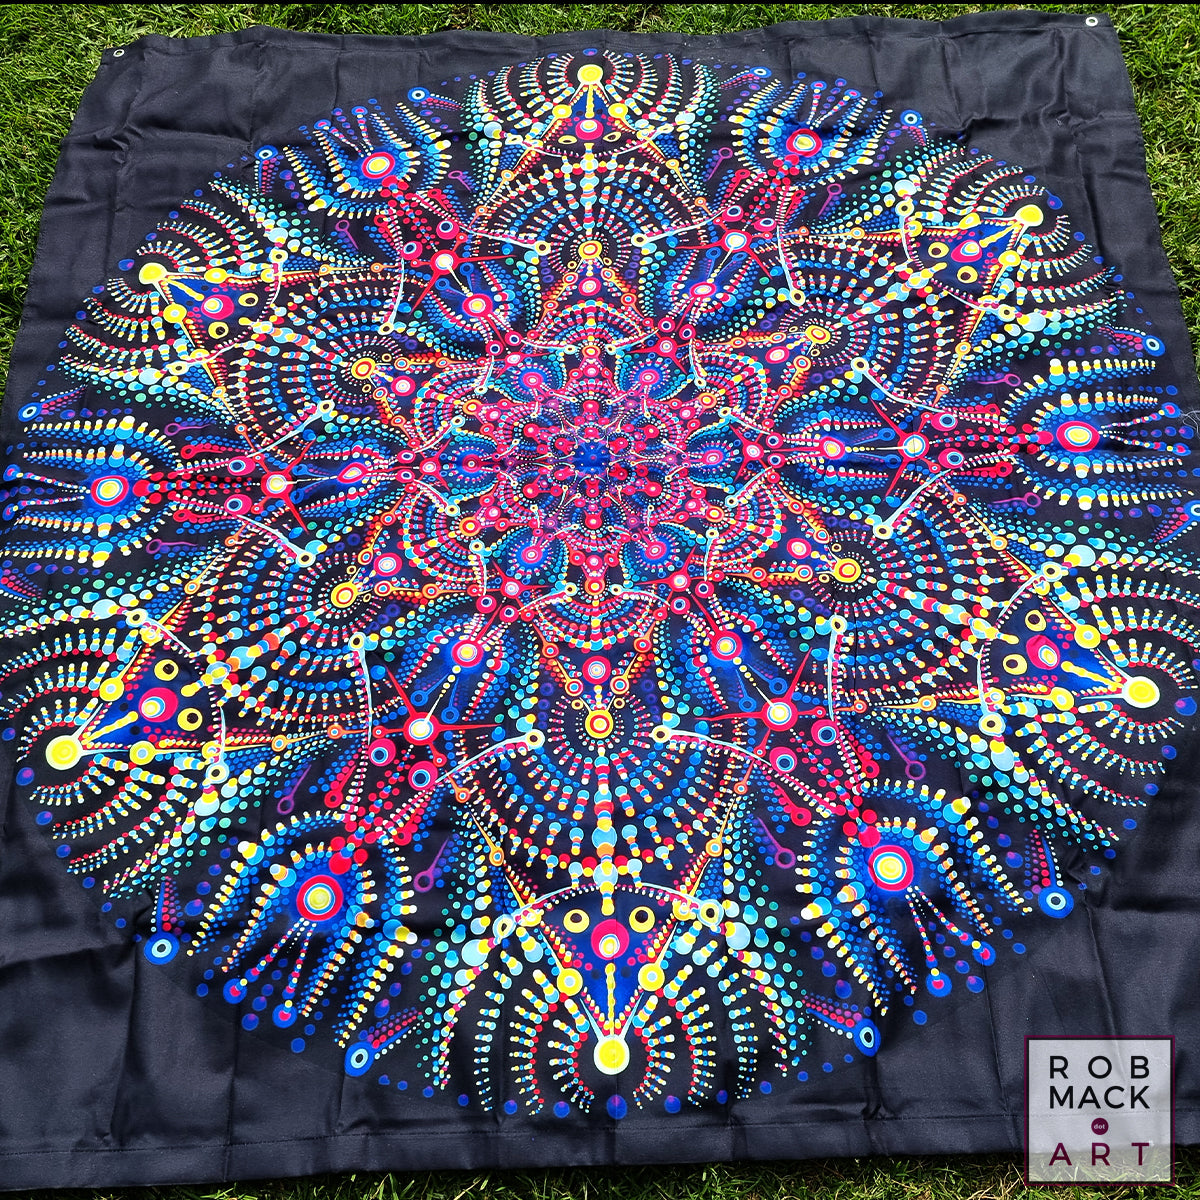 NEW Extra Vibrant HEALING HAVEN 2.0 1.5m Tapestry